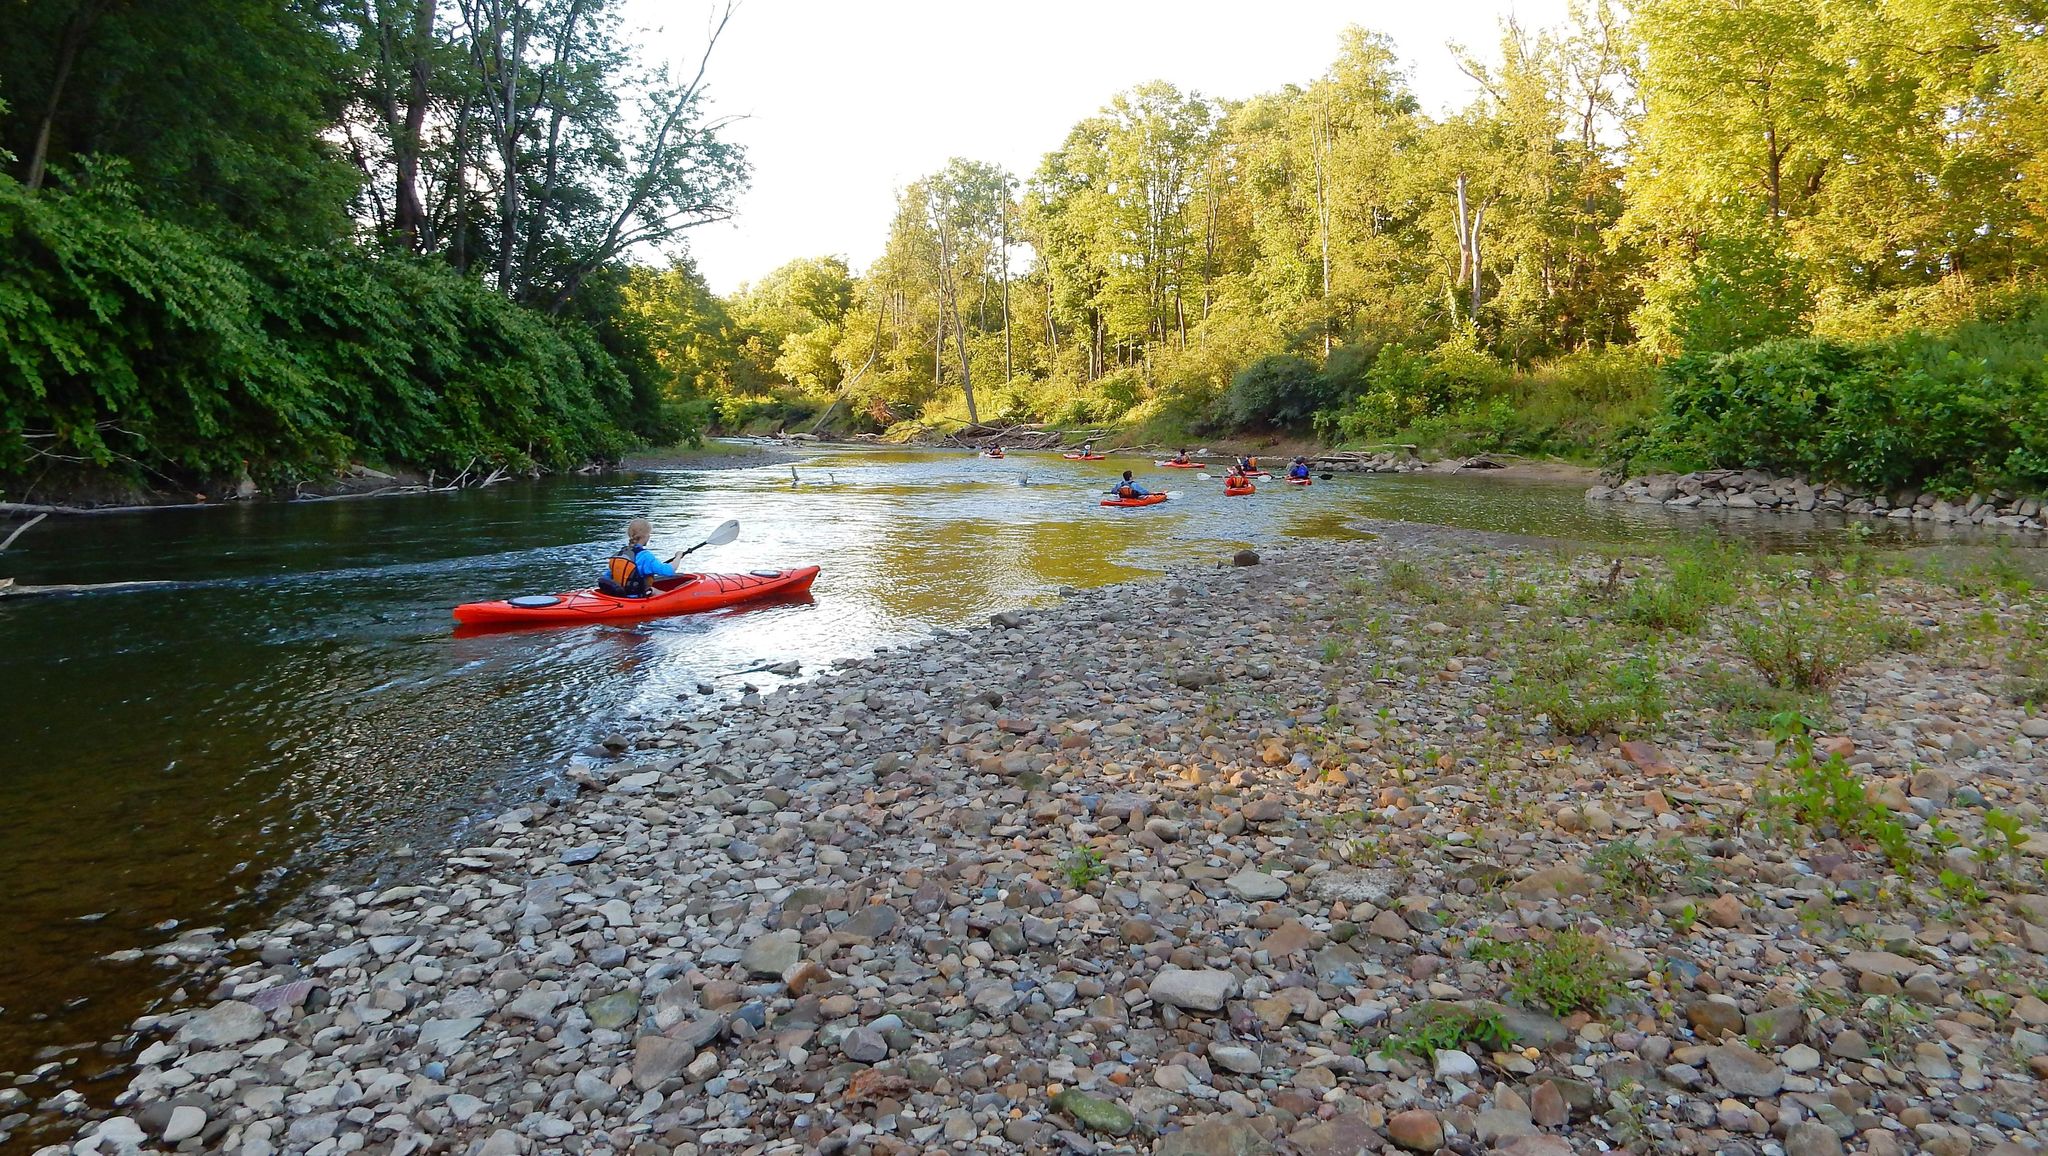 A group of kayaks passing a rocky beach on the Cuyahoga River in summer.